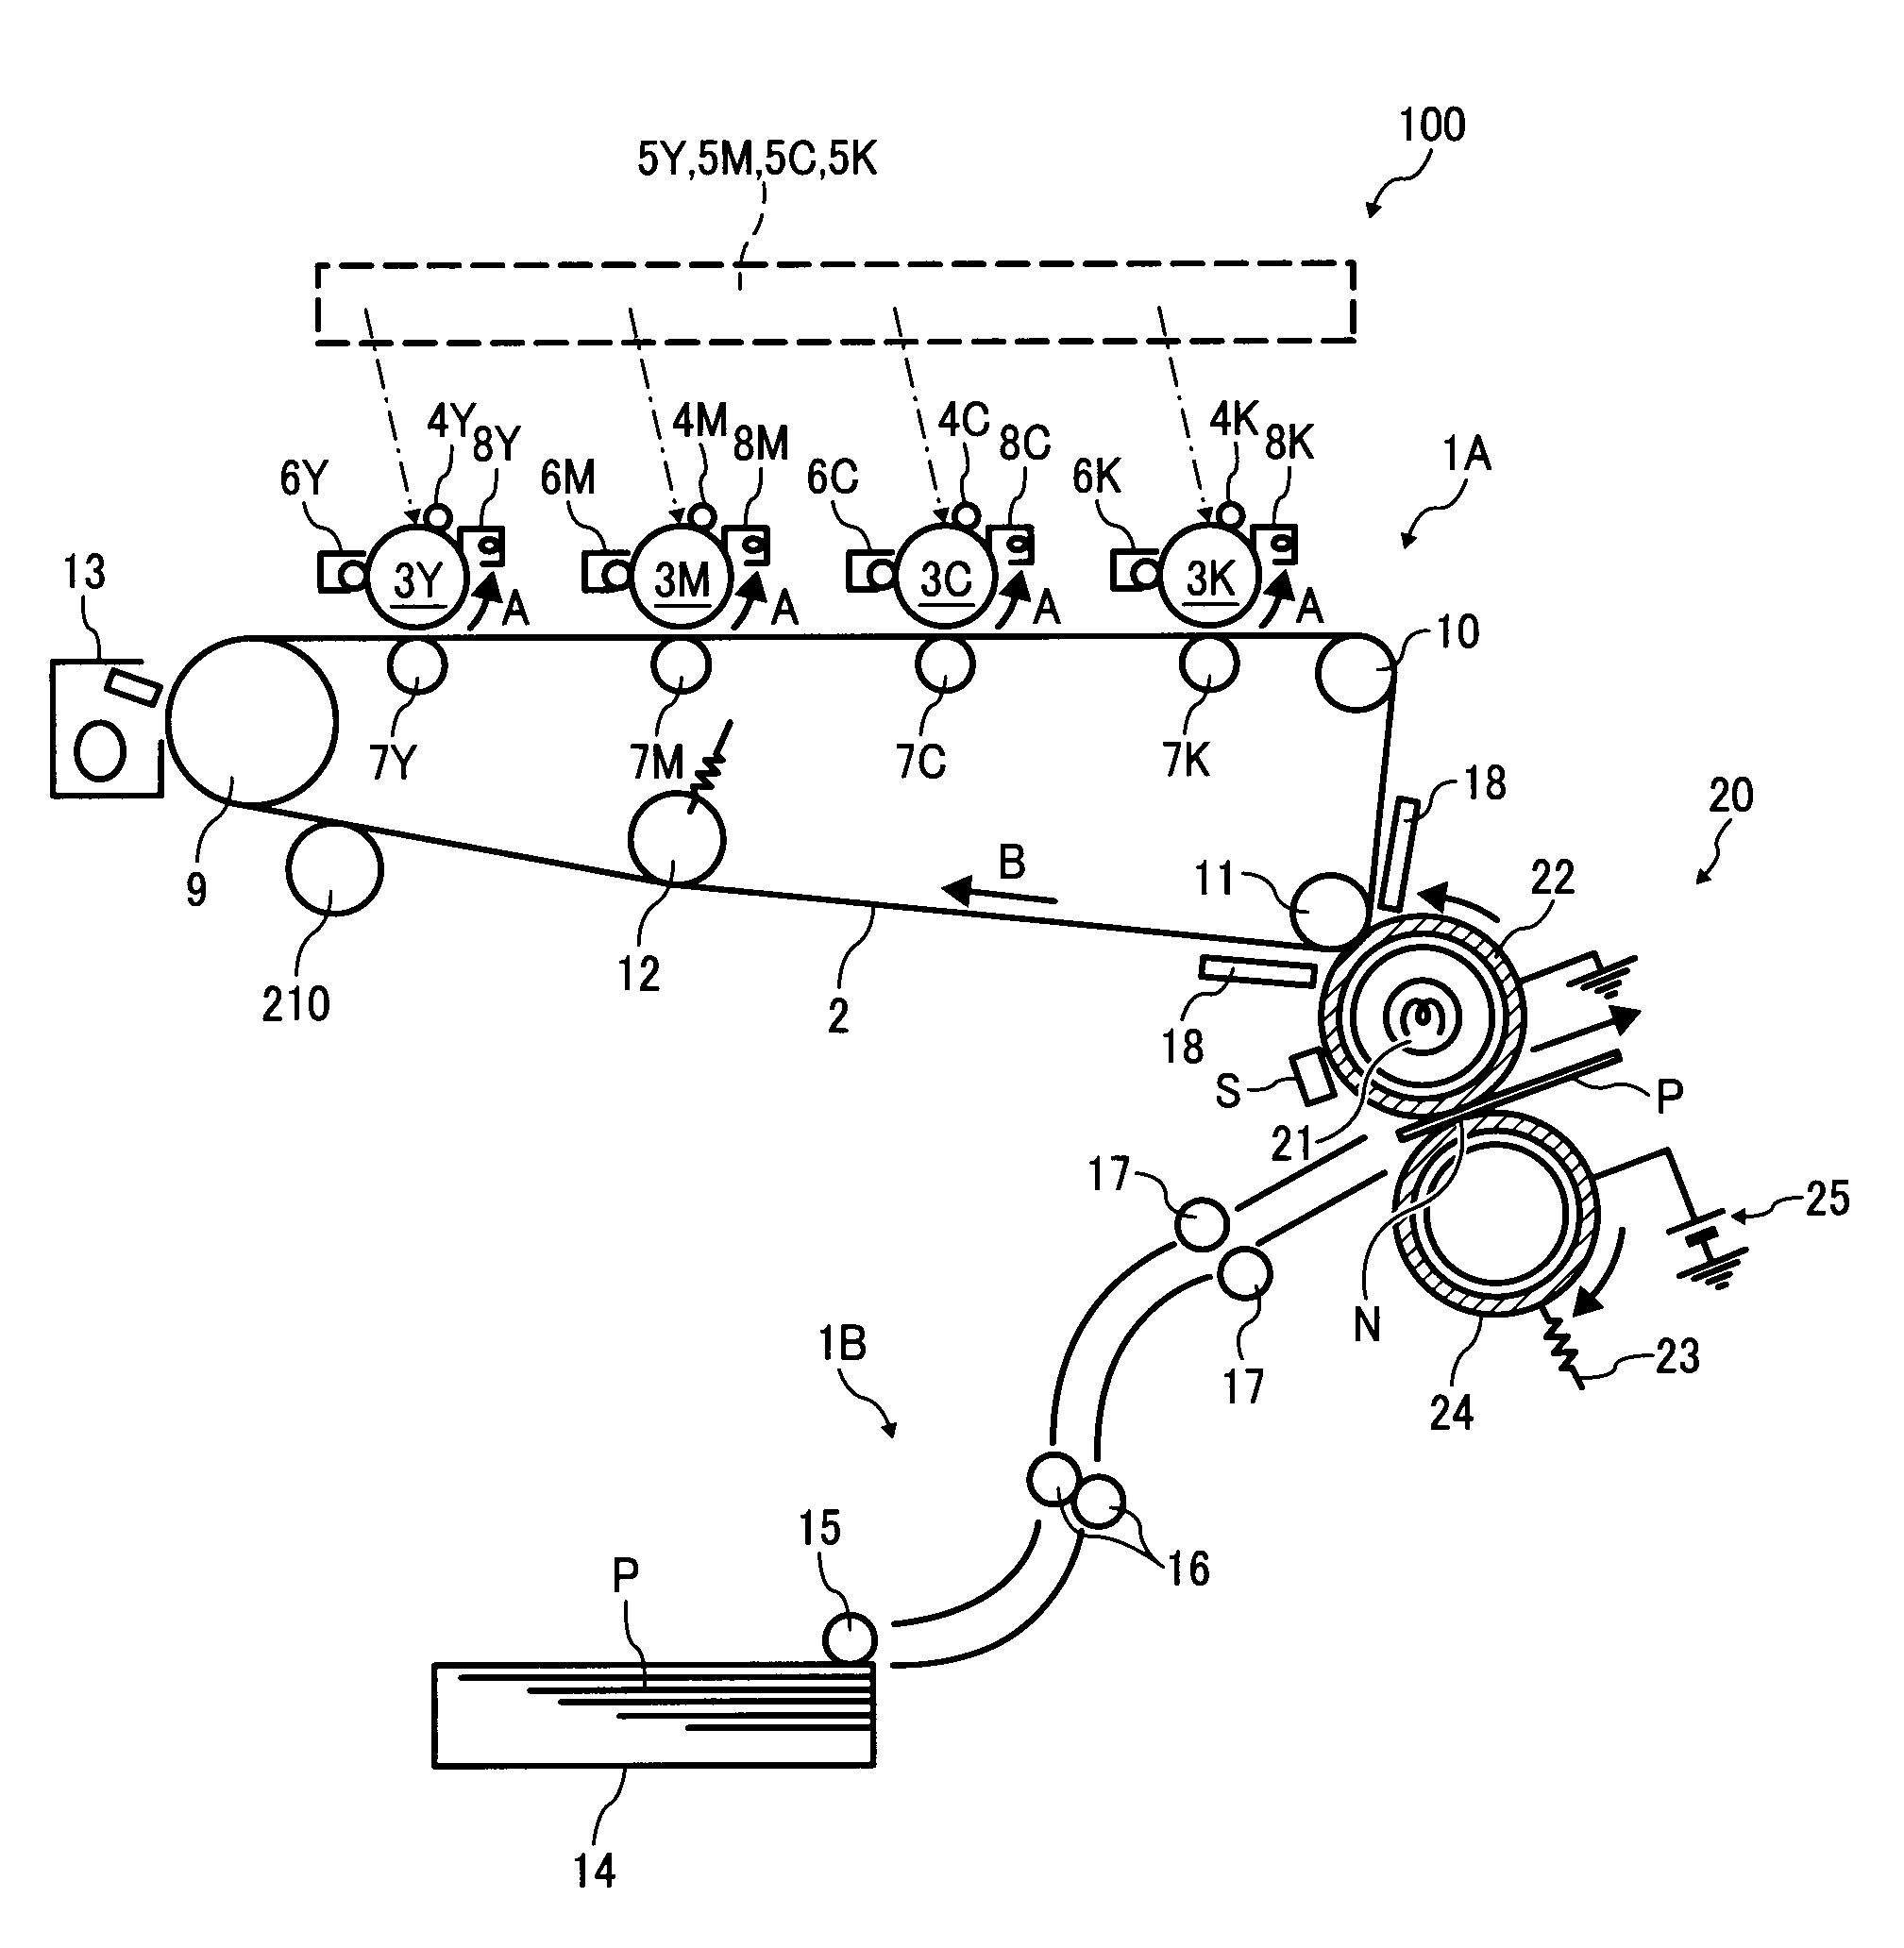 Transfer-fixing device, image forming apparatus, and transfer-fixing method